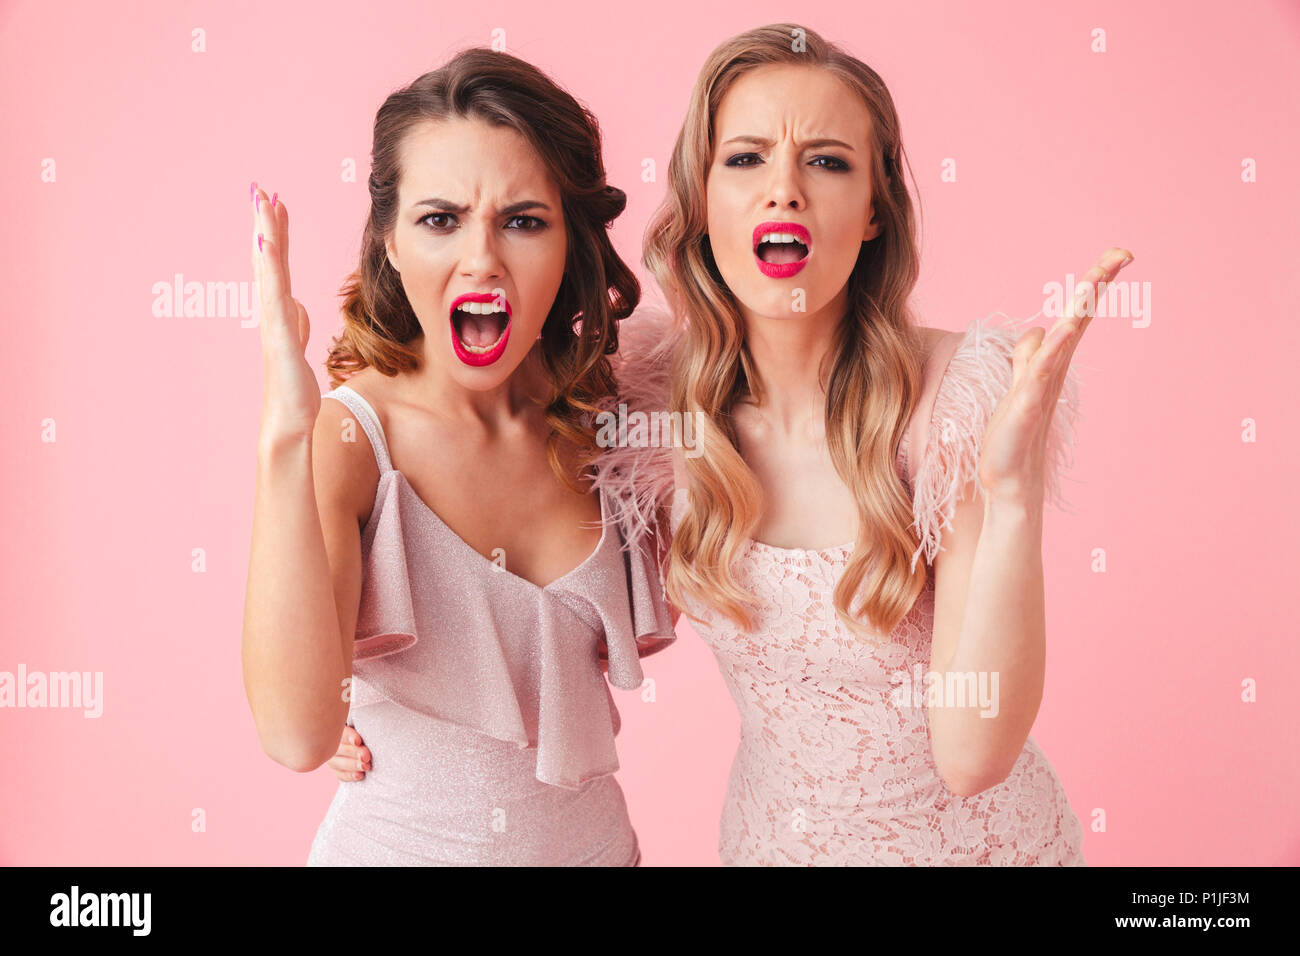 Two displeased angry women in dresses screaming and looking at the camera over pink background Stock Photo